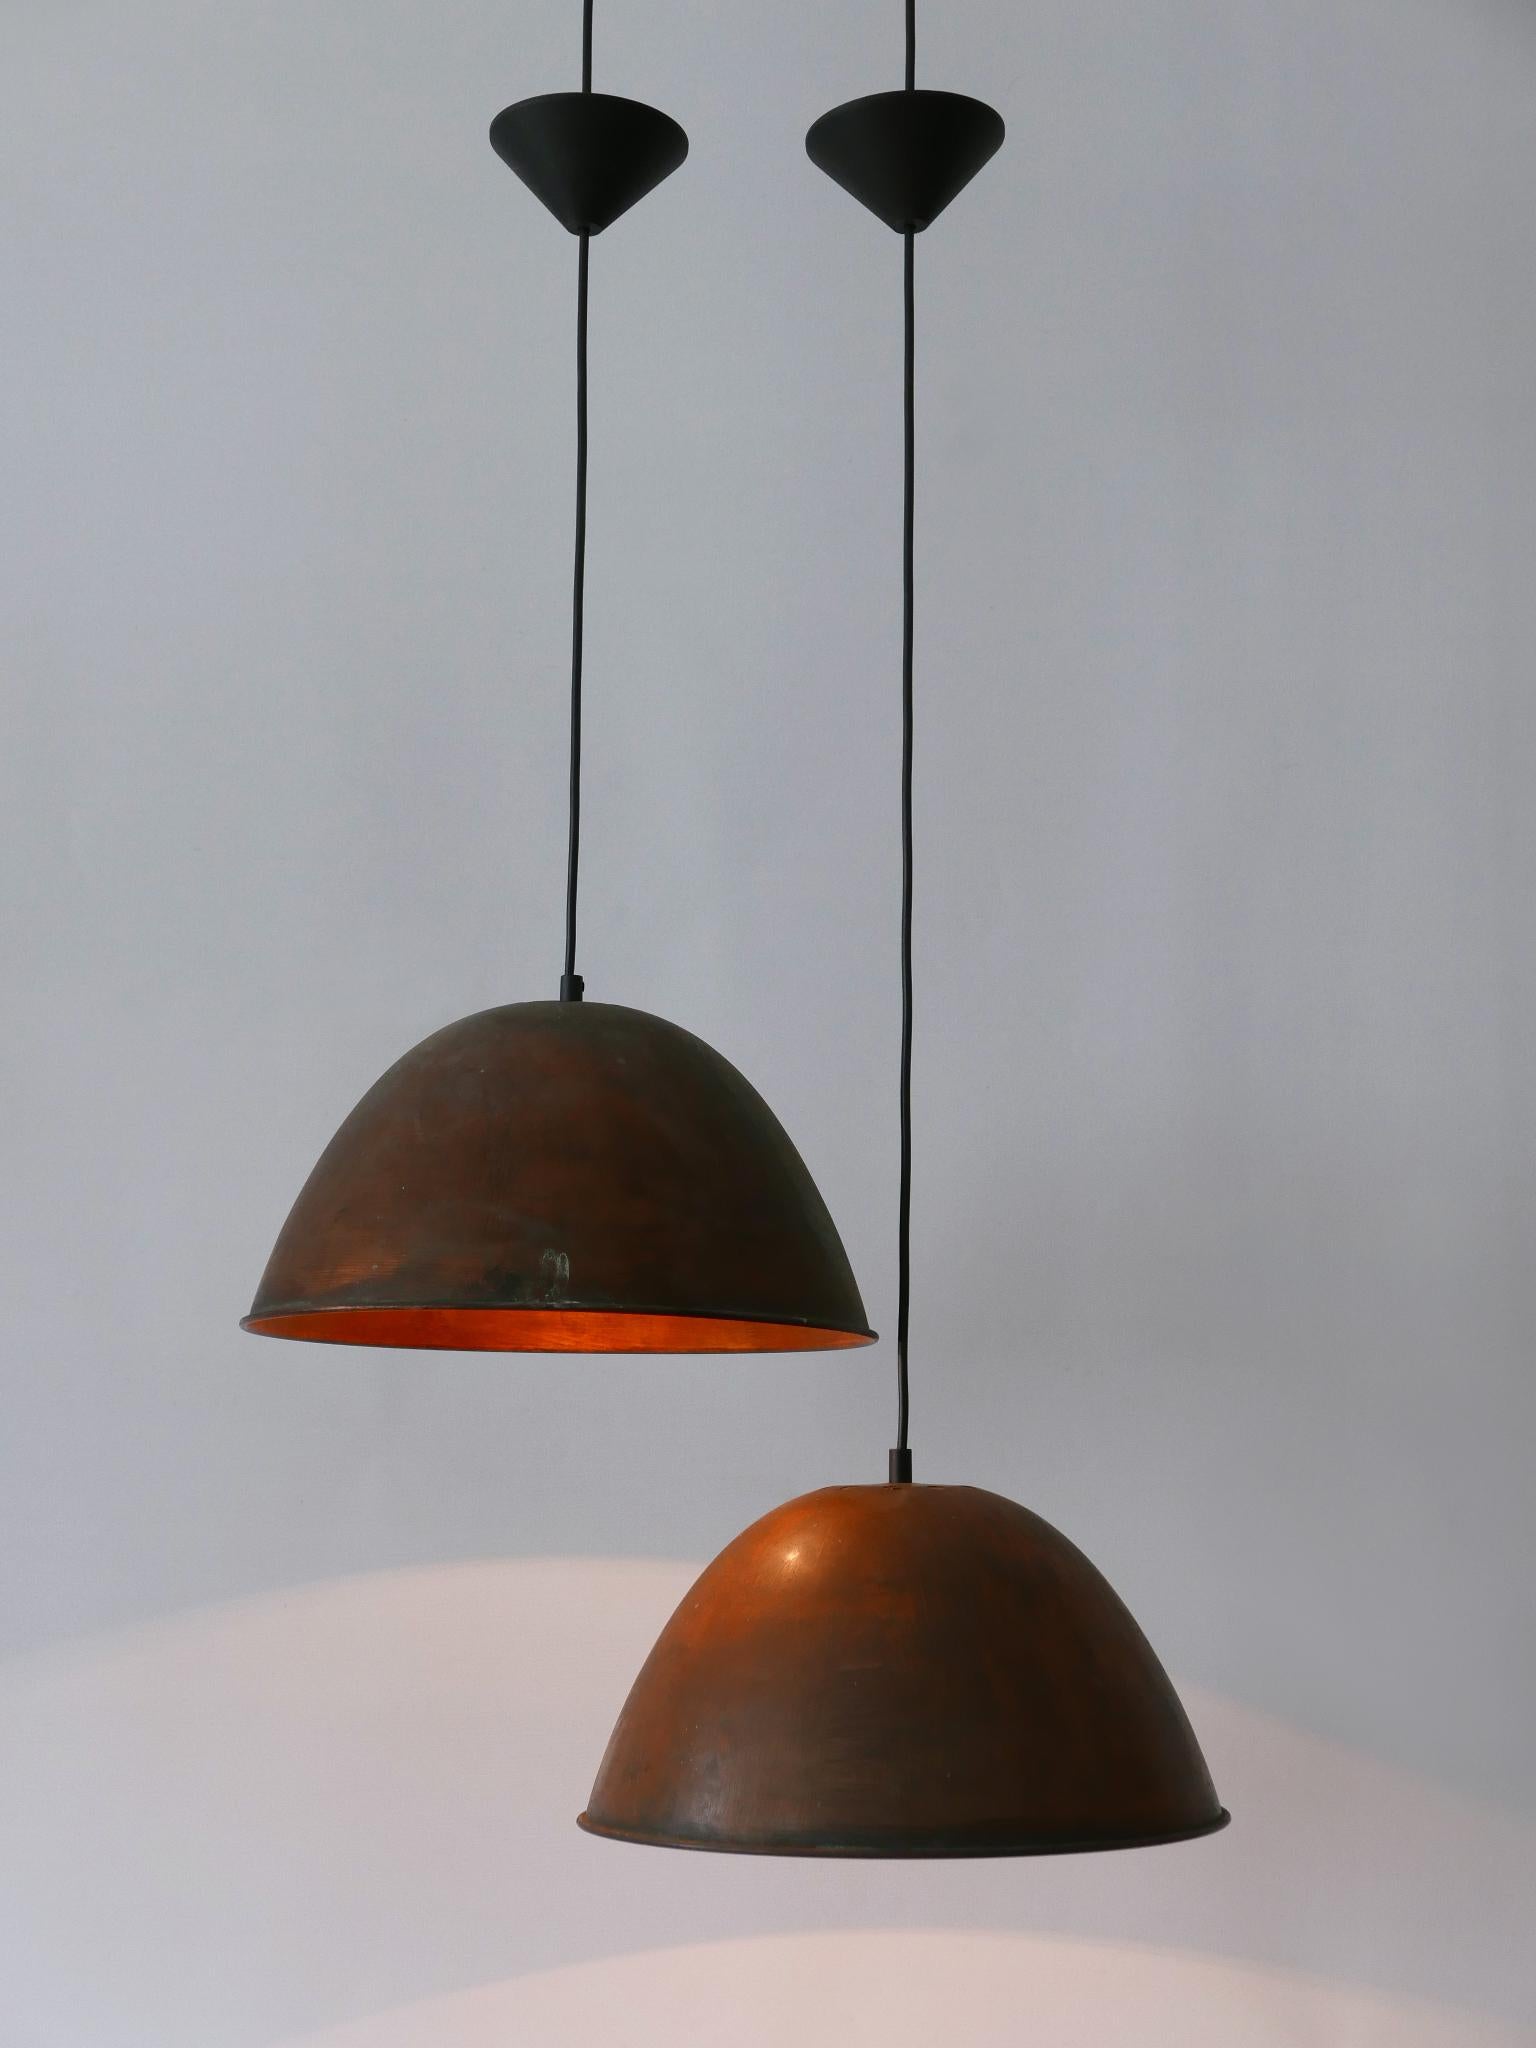 Set of Two Mid-Century Modern Copper Pendant Lamps or Hanging Lights 1950s For Sale 3